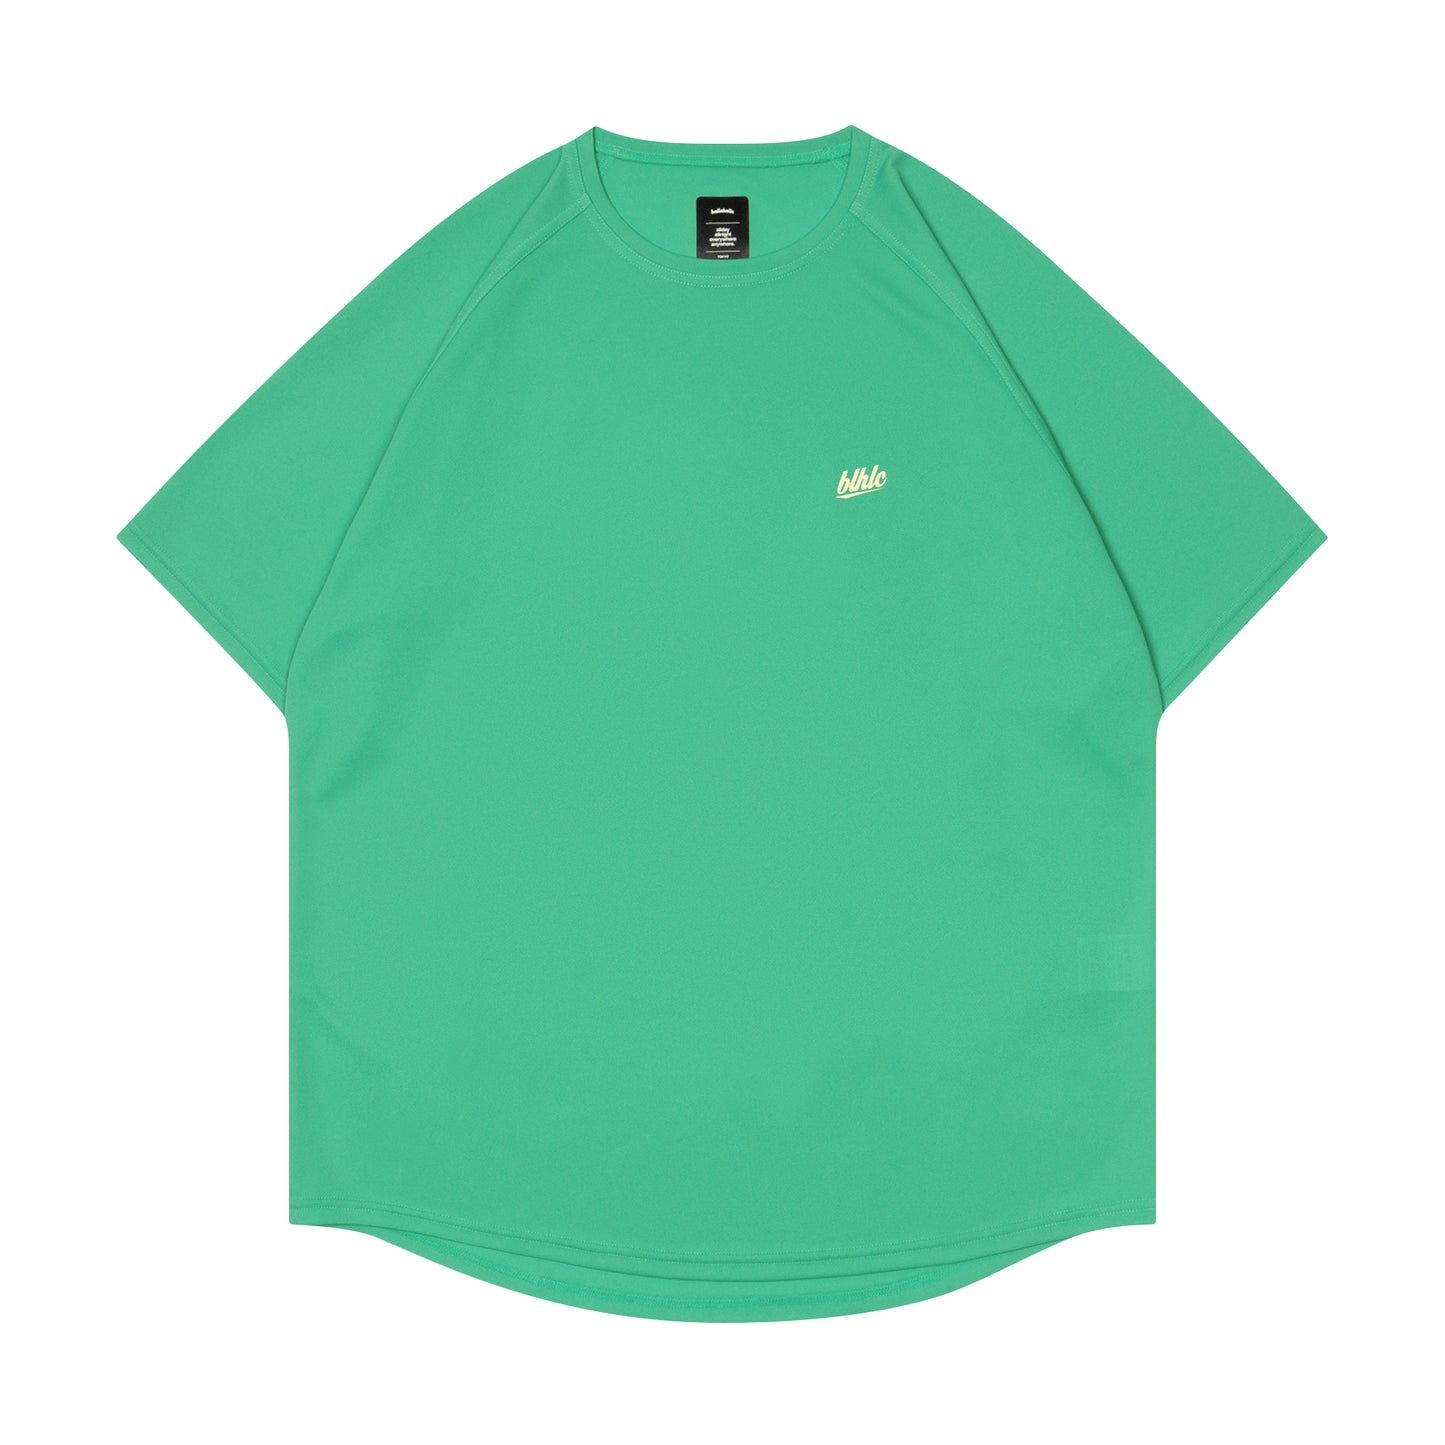 blhlc Cool Tee (sea green/ivory)